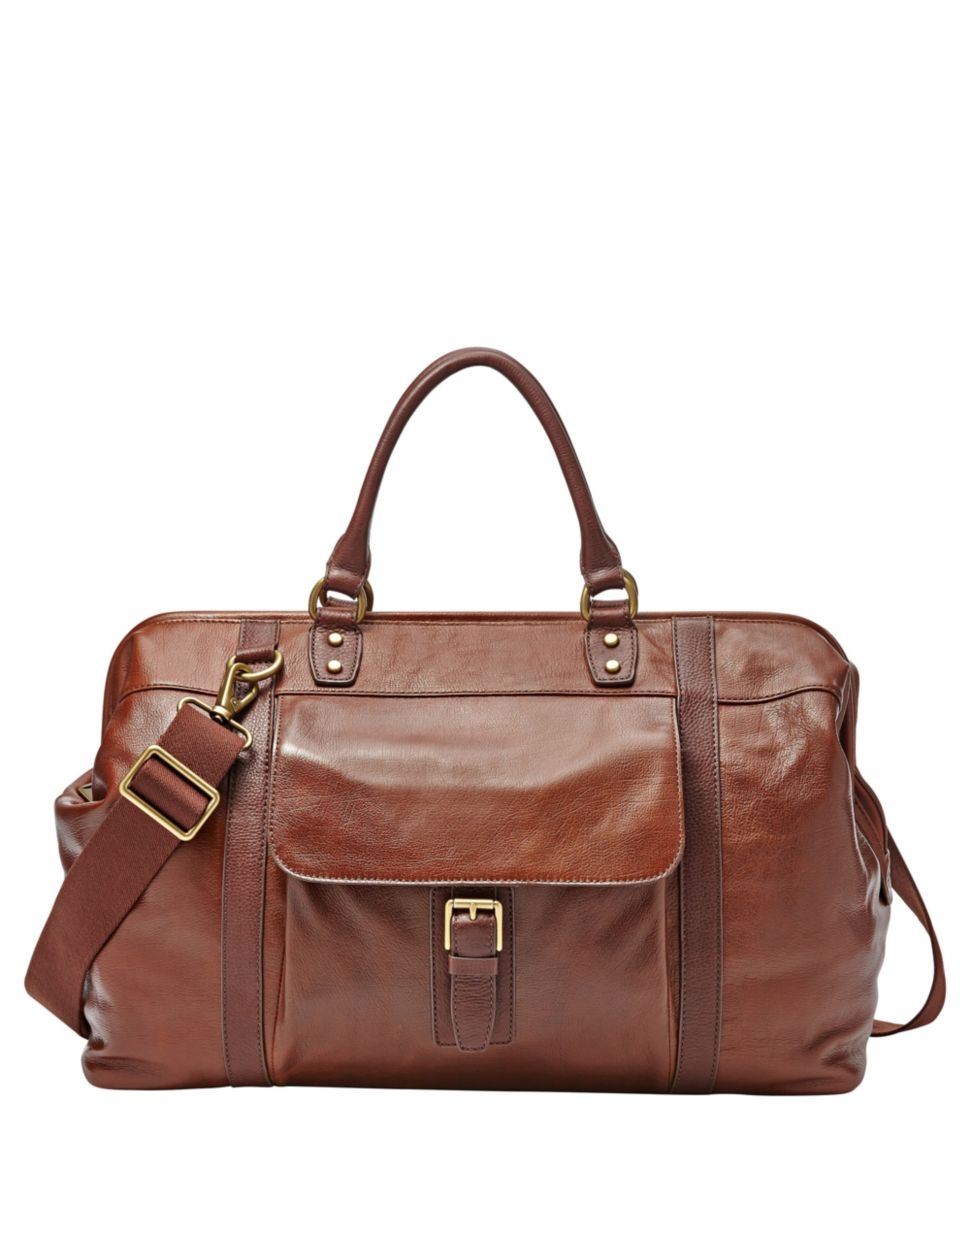 Fossil Leather Framed Duffel Bag in Cognac (Brown) for Men - Lyst